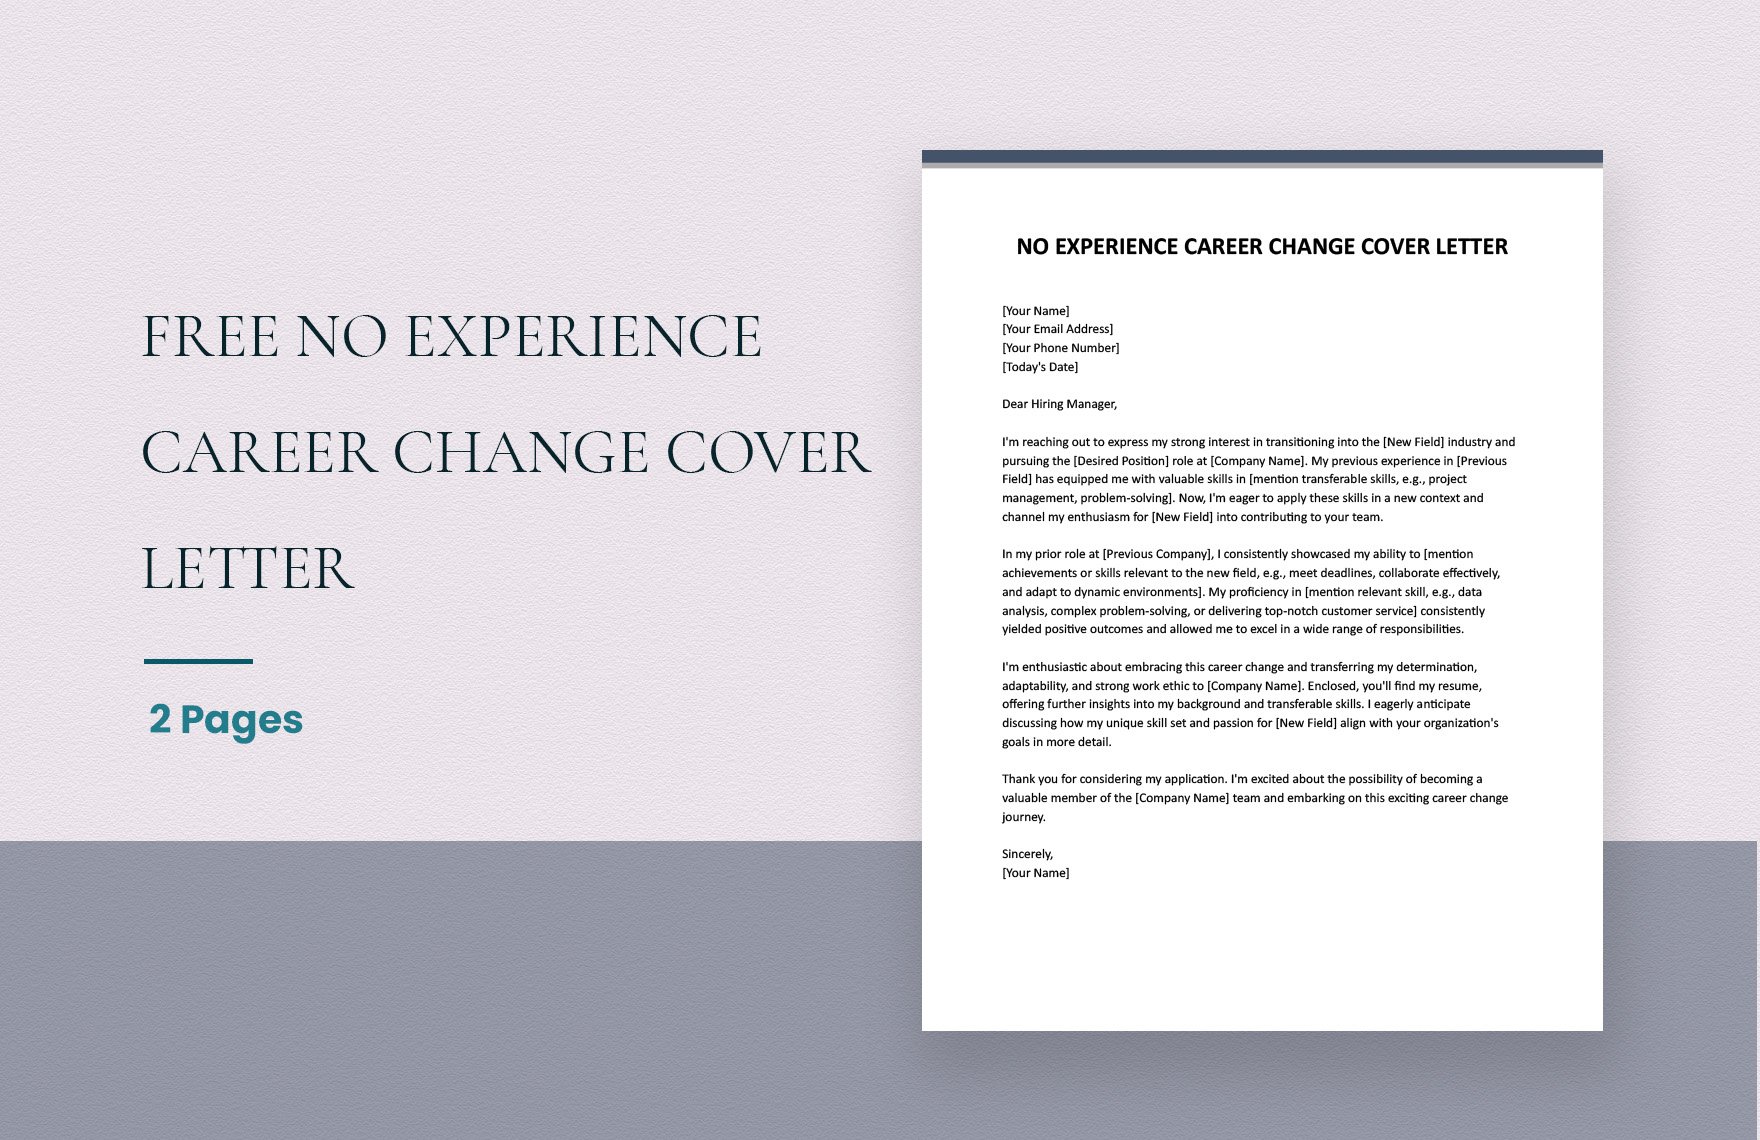 No experience Career Change Cover letter